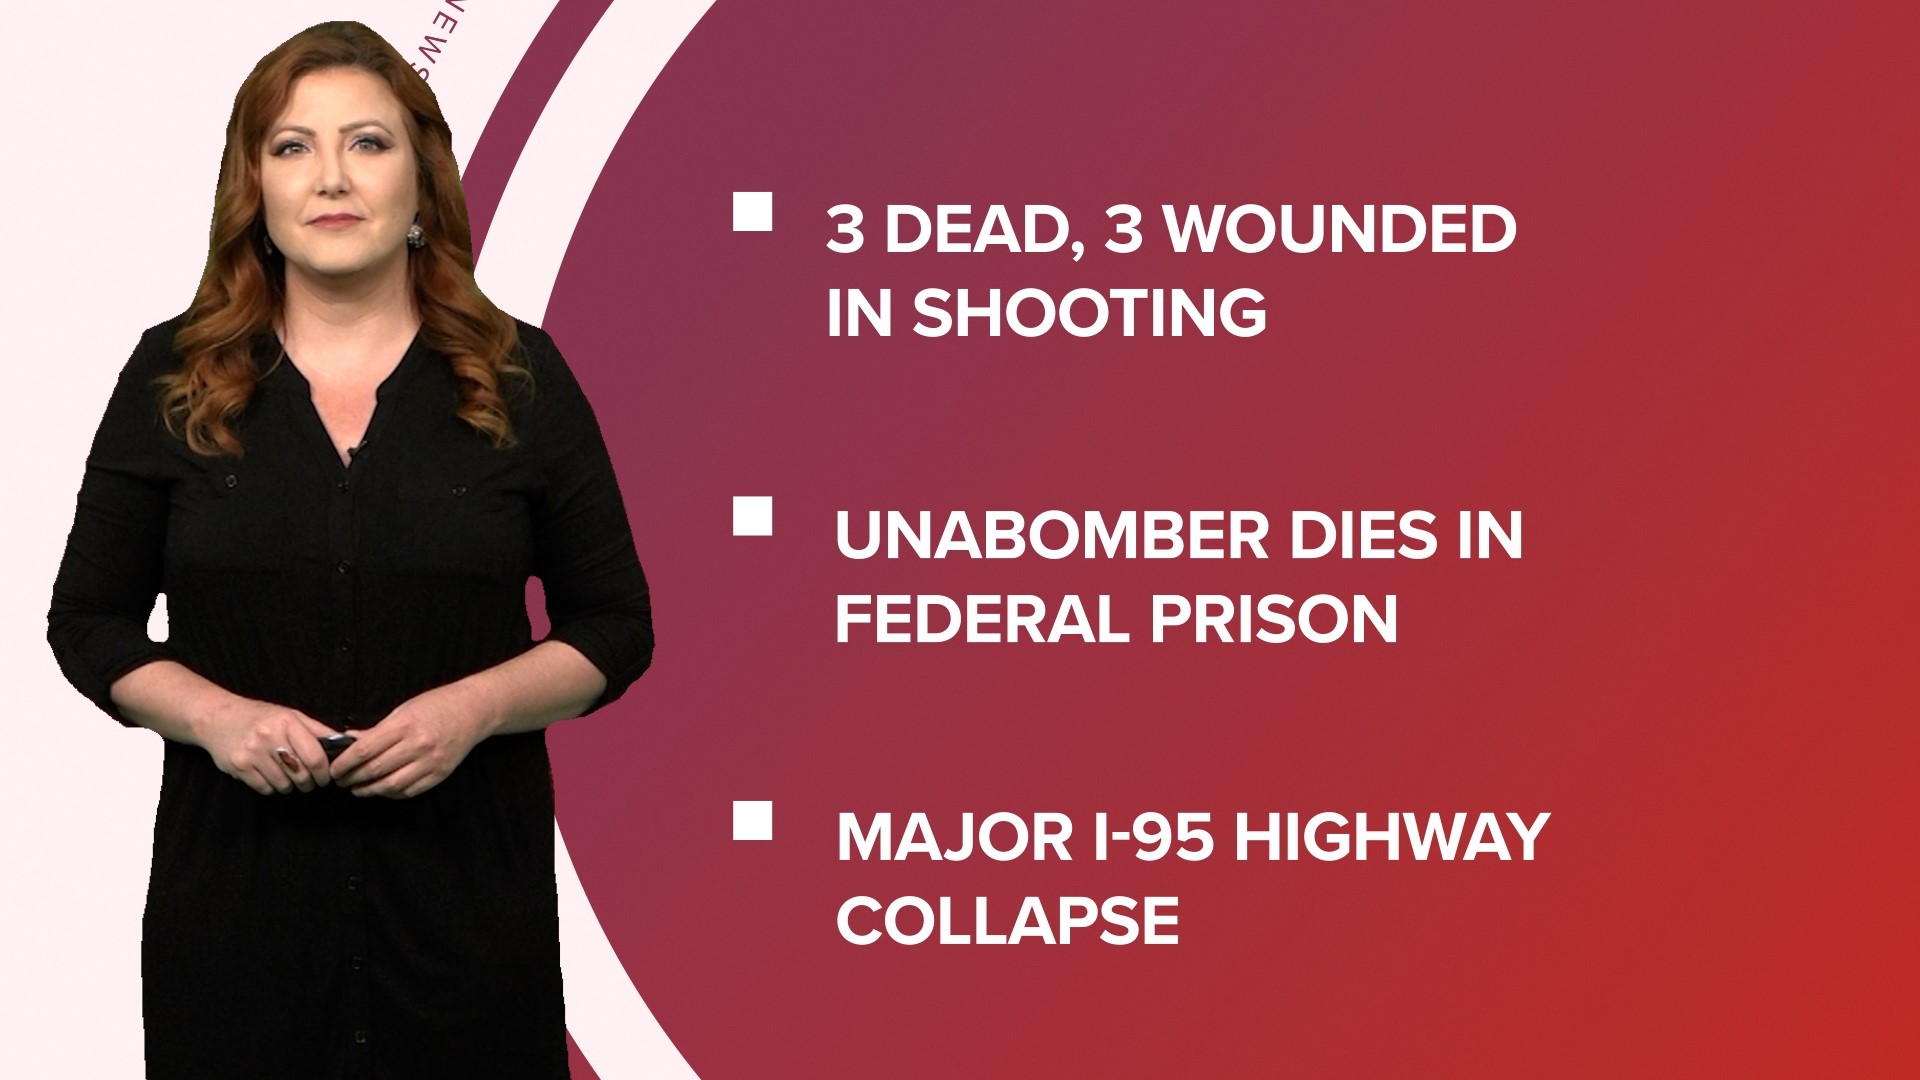 A look at what is happening in the news from 3 killed, and 3 others injured in a Maryland shooting to the Unabomber dies in prison and 2023 Tony Award winners.